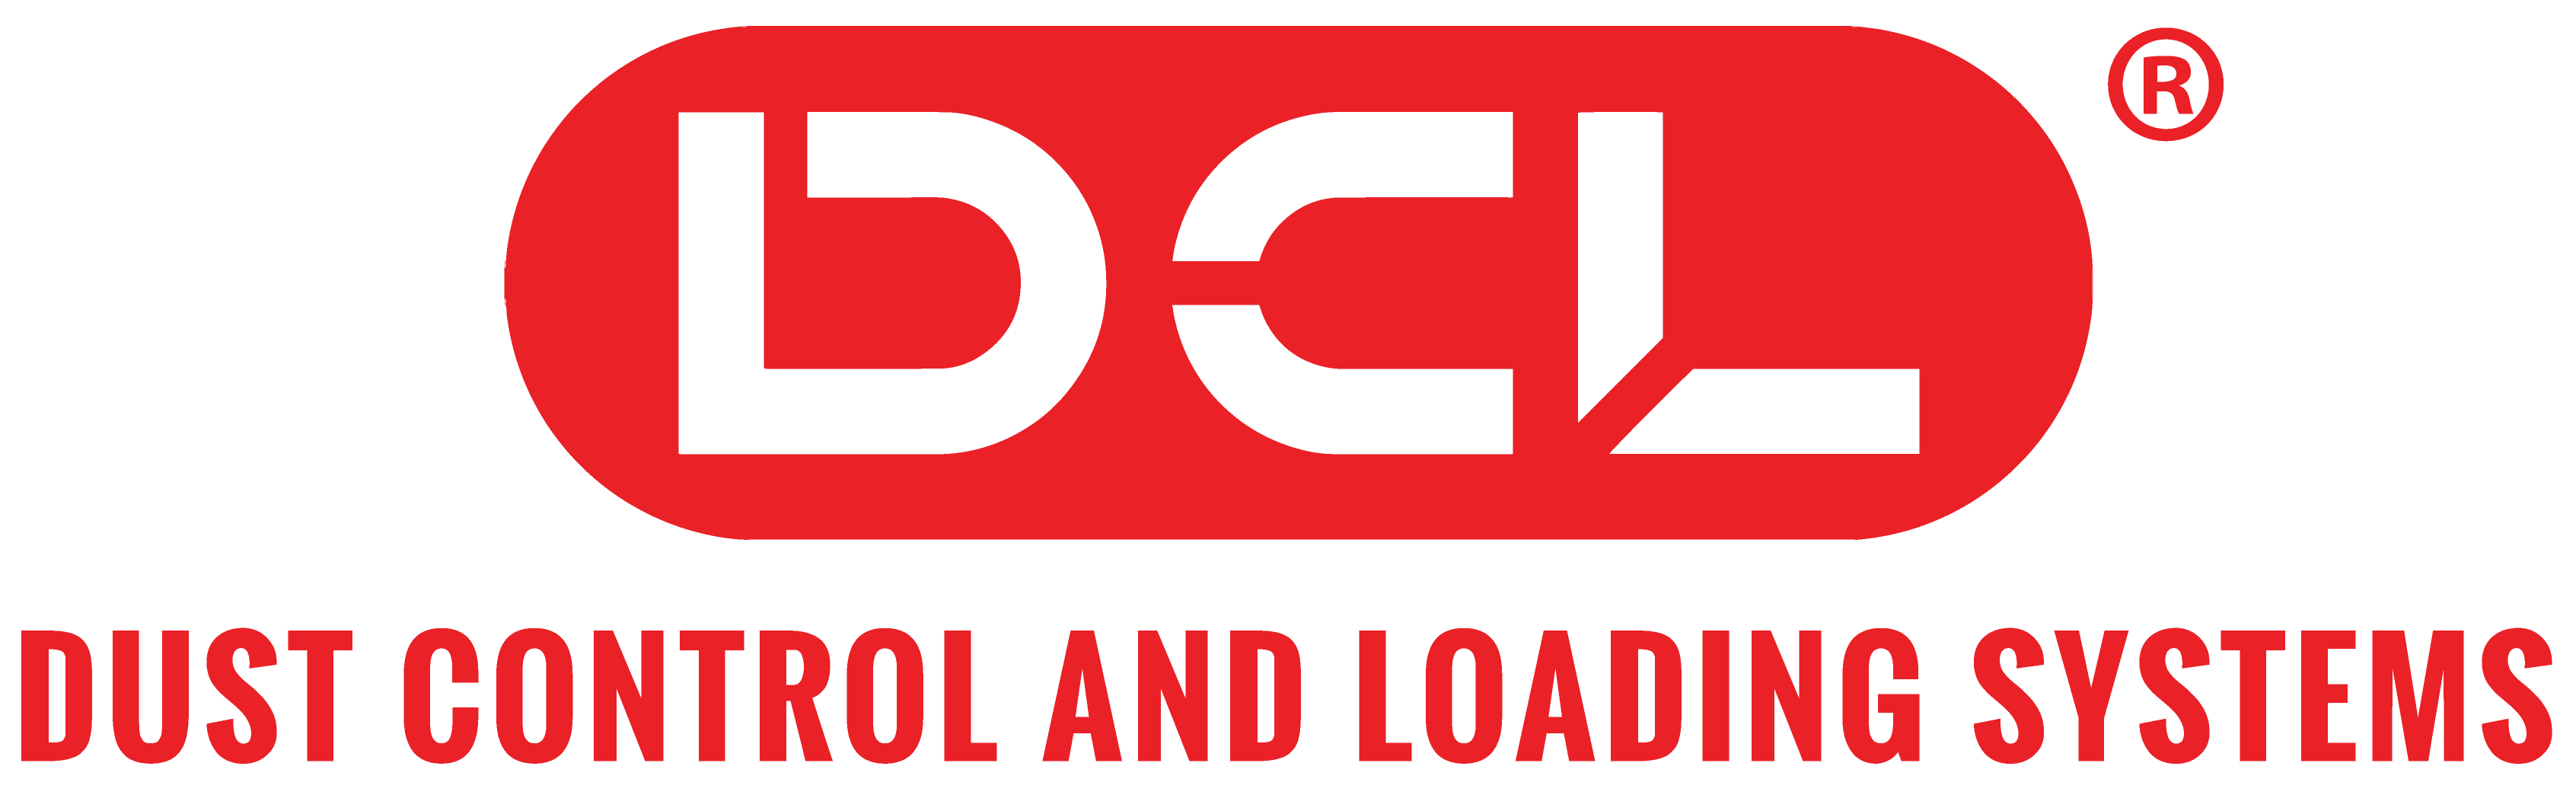 DCL Logo - Dust Control and Loading Systems